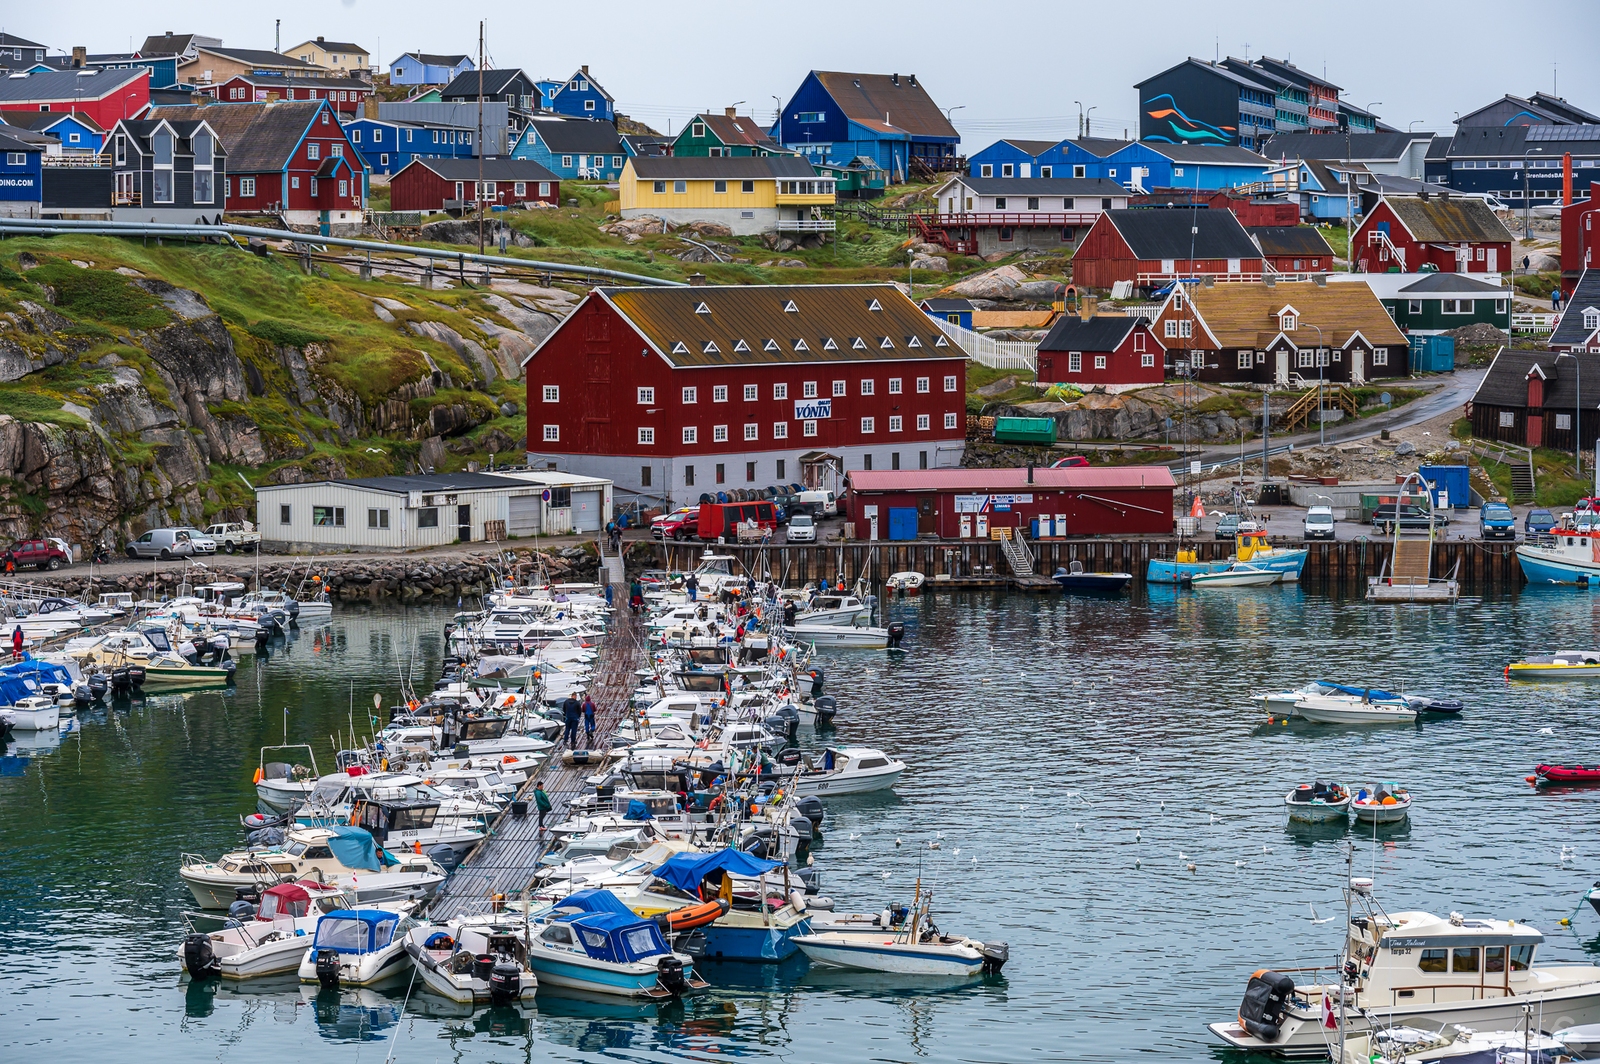 Image of Ilulissat Harbour by Sue Wolfe